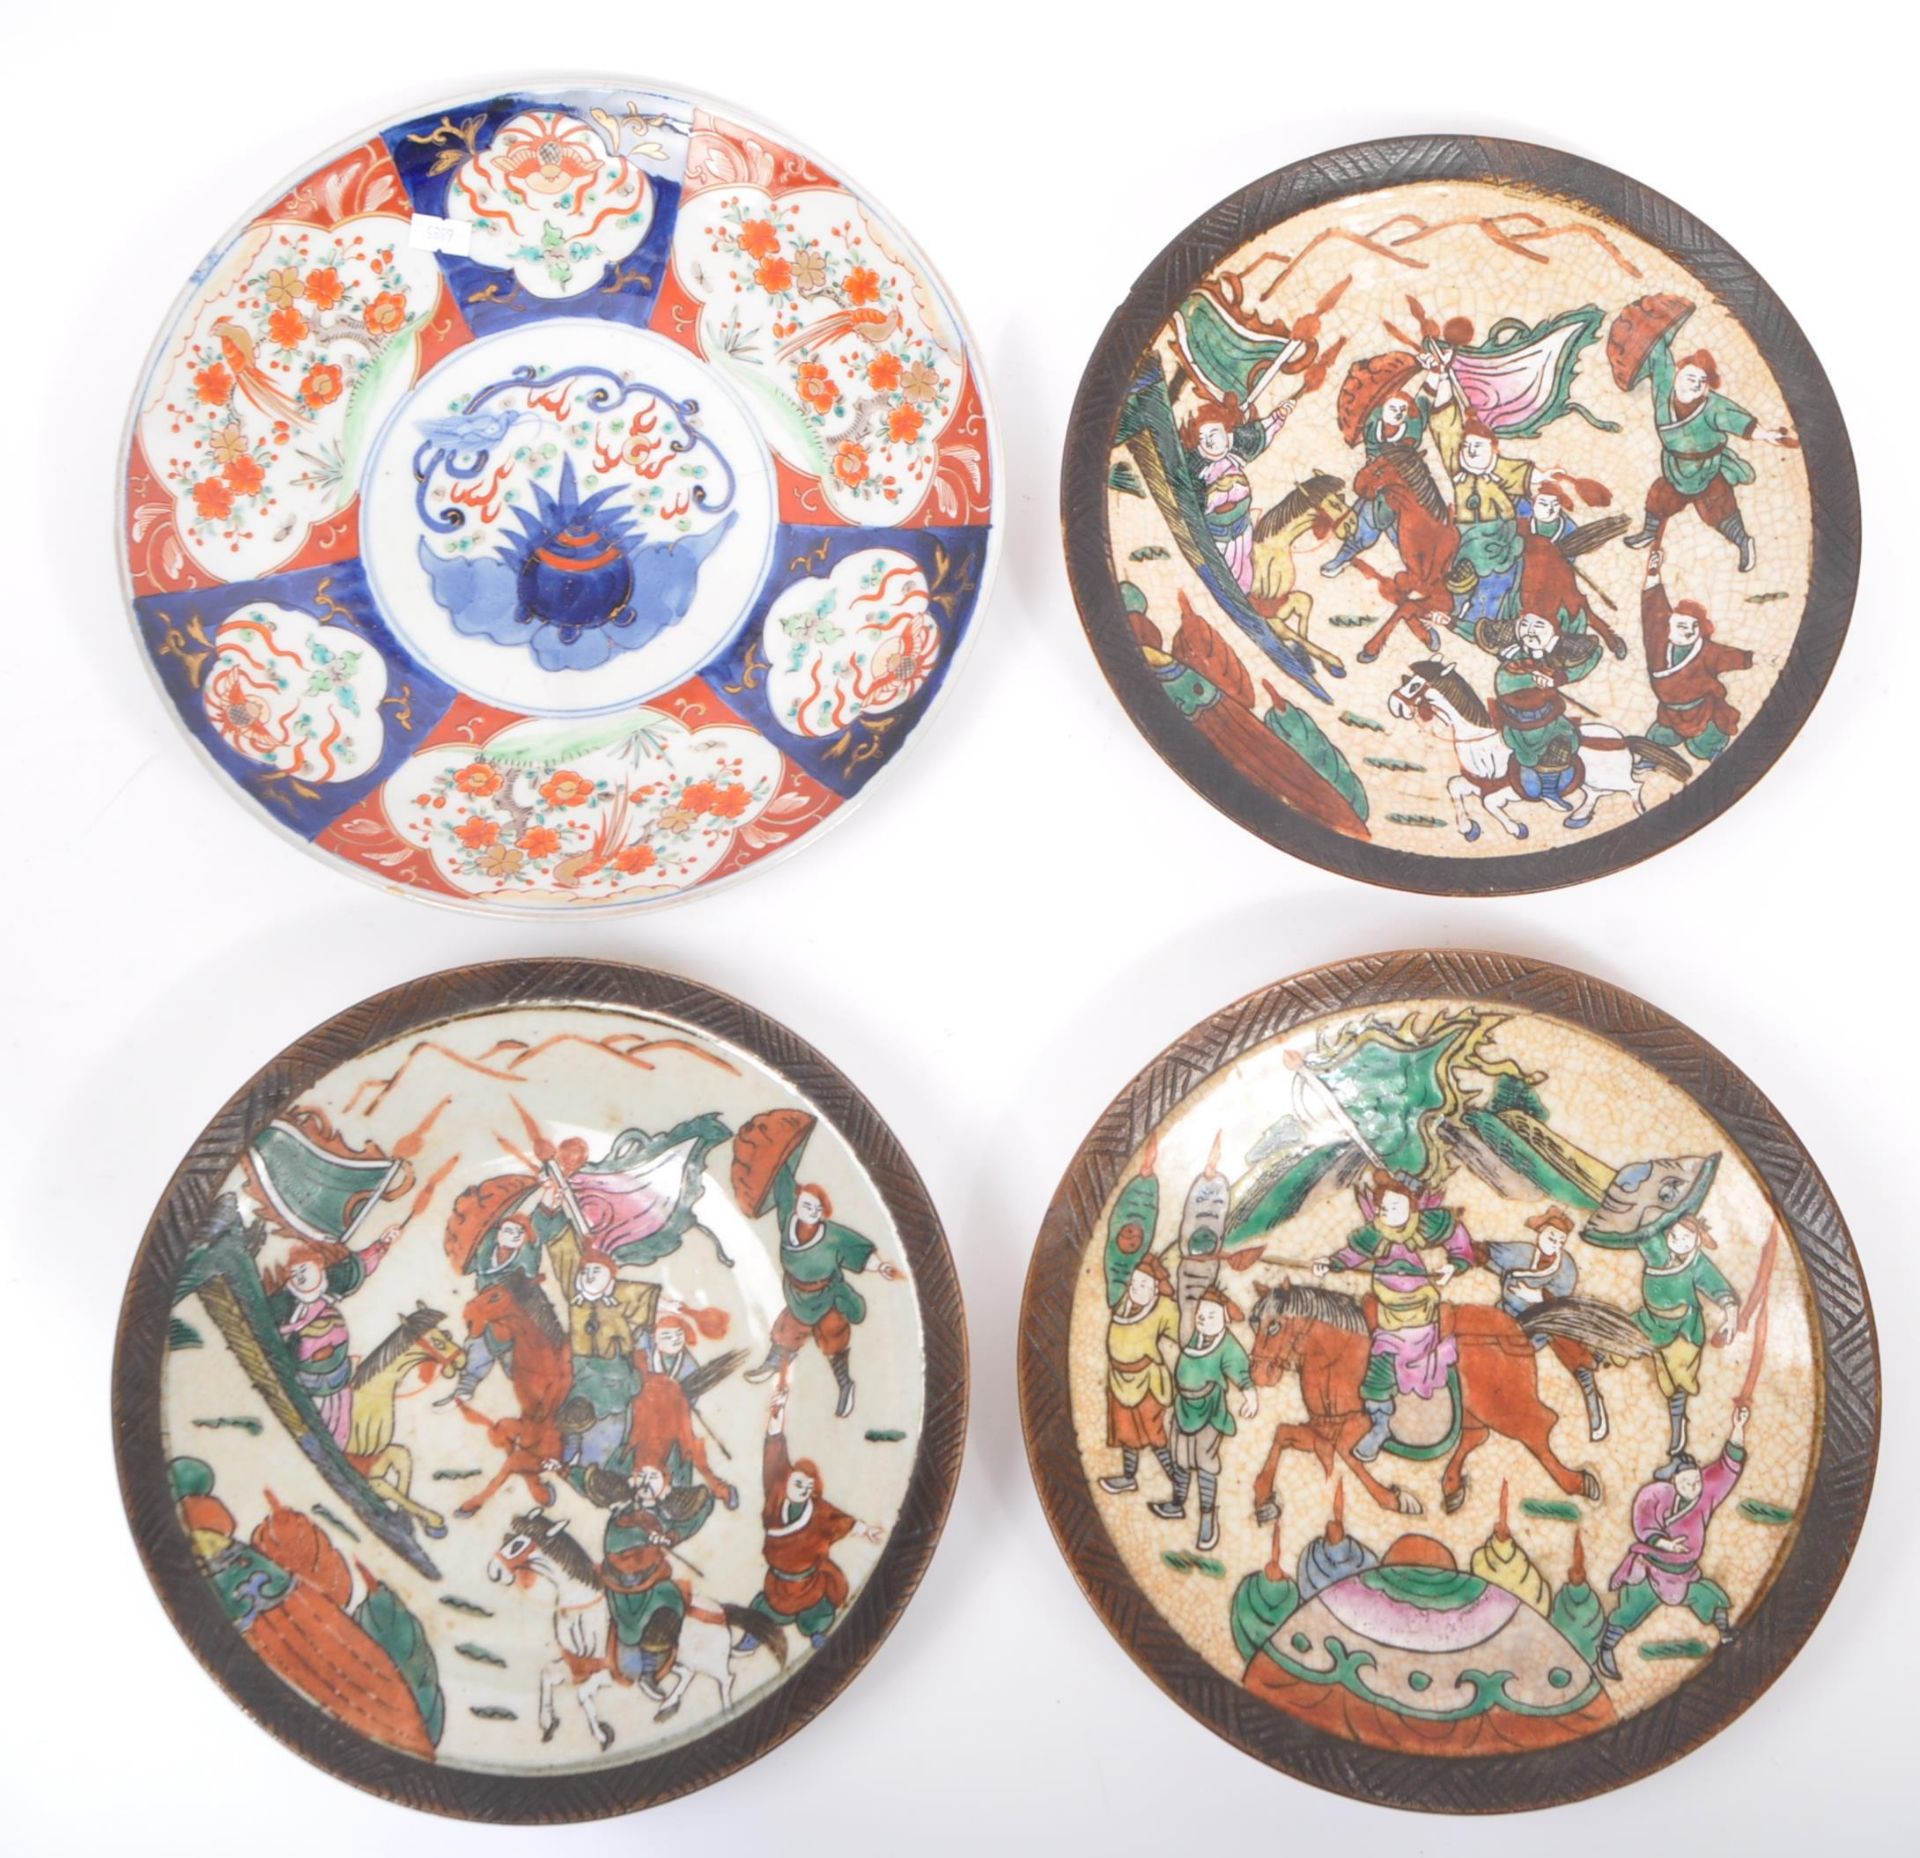 COLLECTION OF JAPANESE CRACKLE GLAZE PLATES WITH IMARI